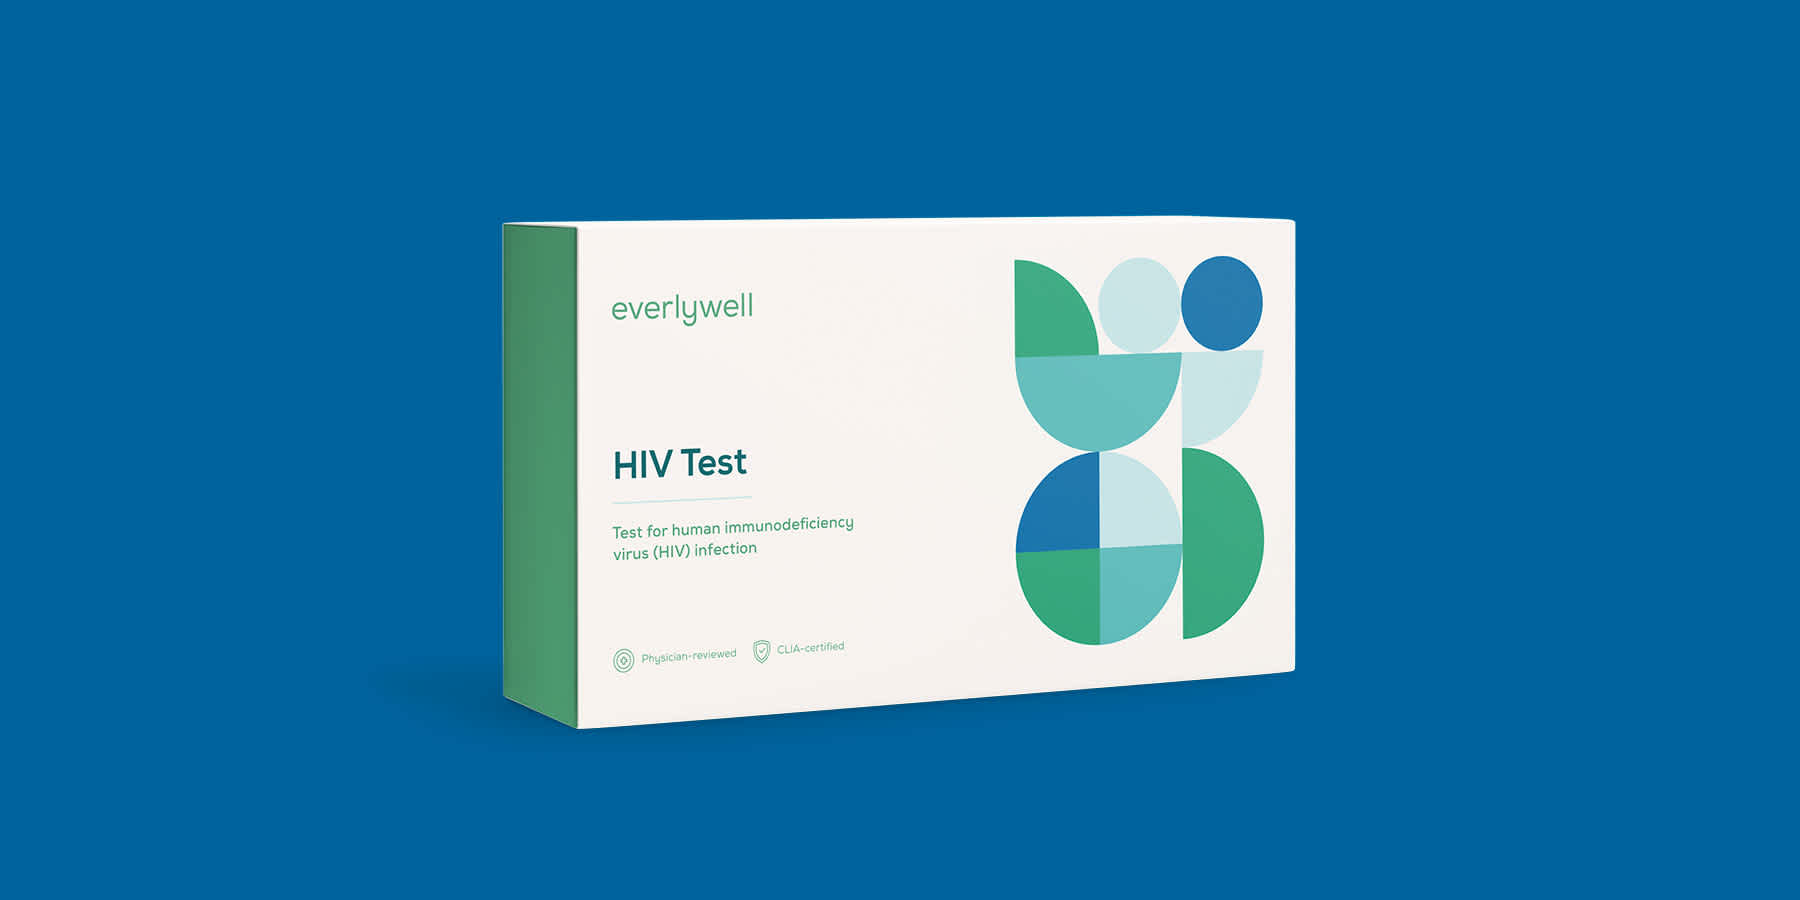 Home HIV test kit for routine HIV screening against a blue background